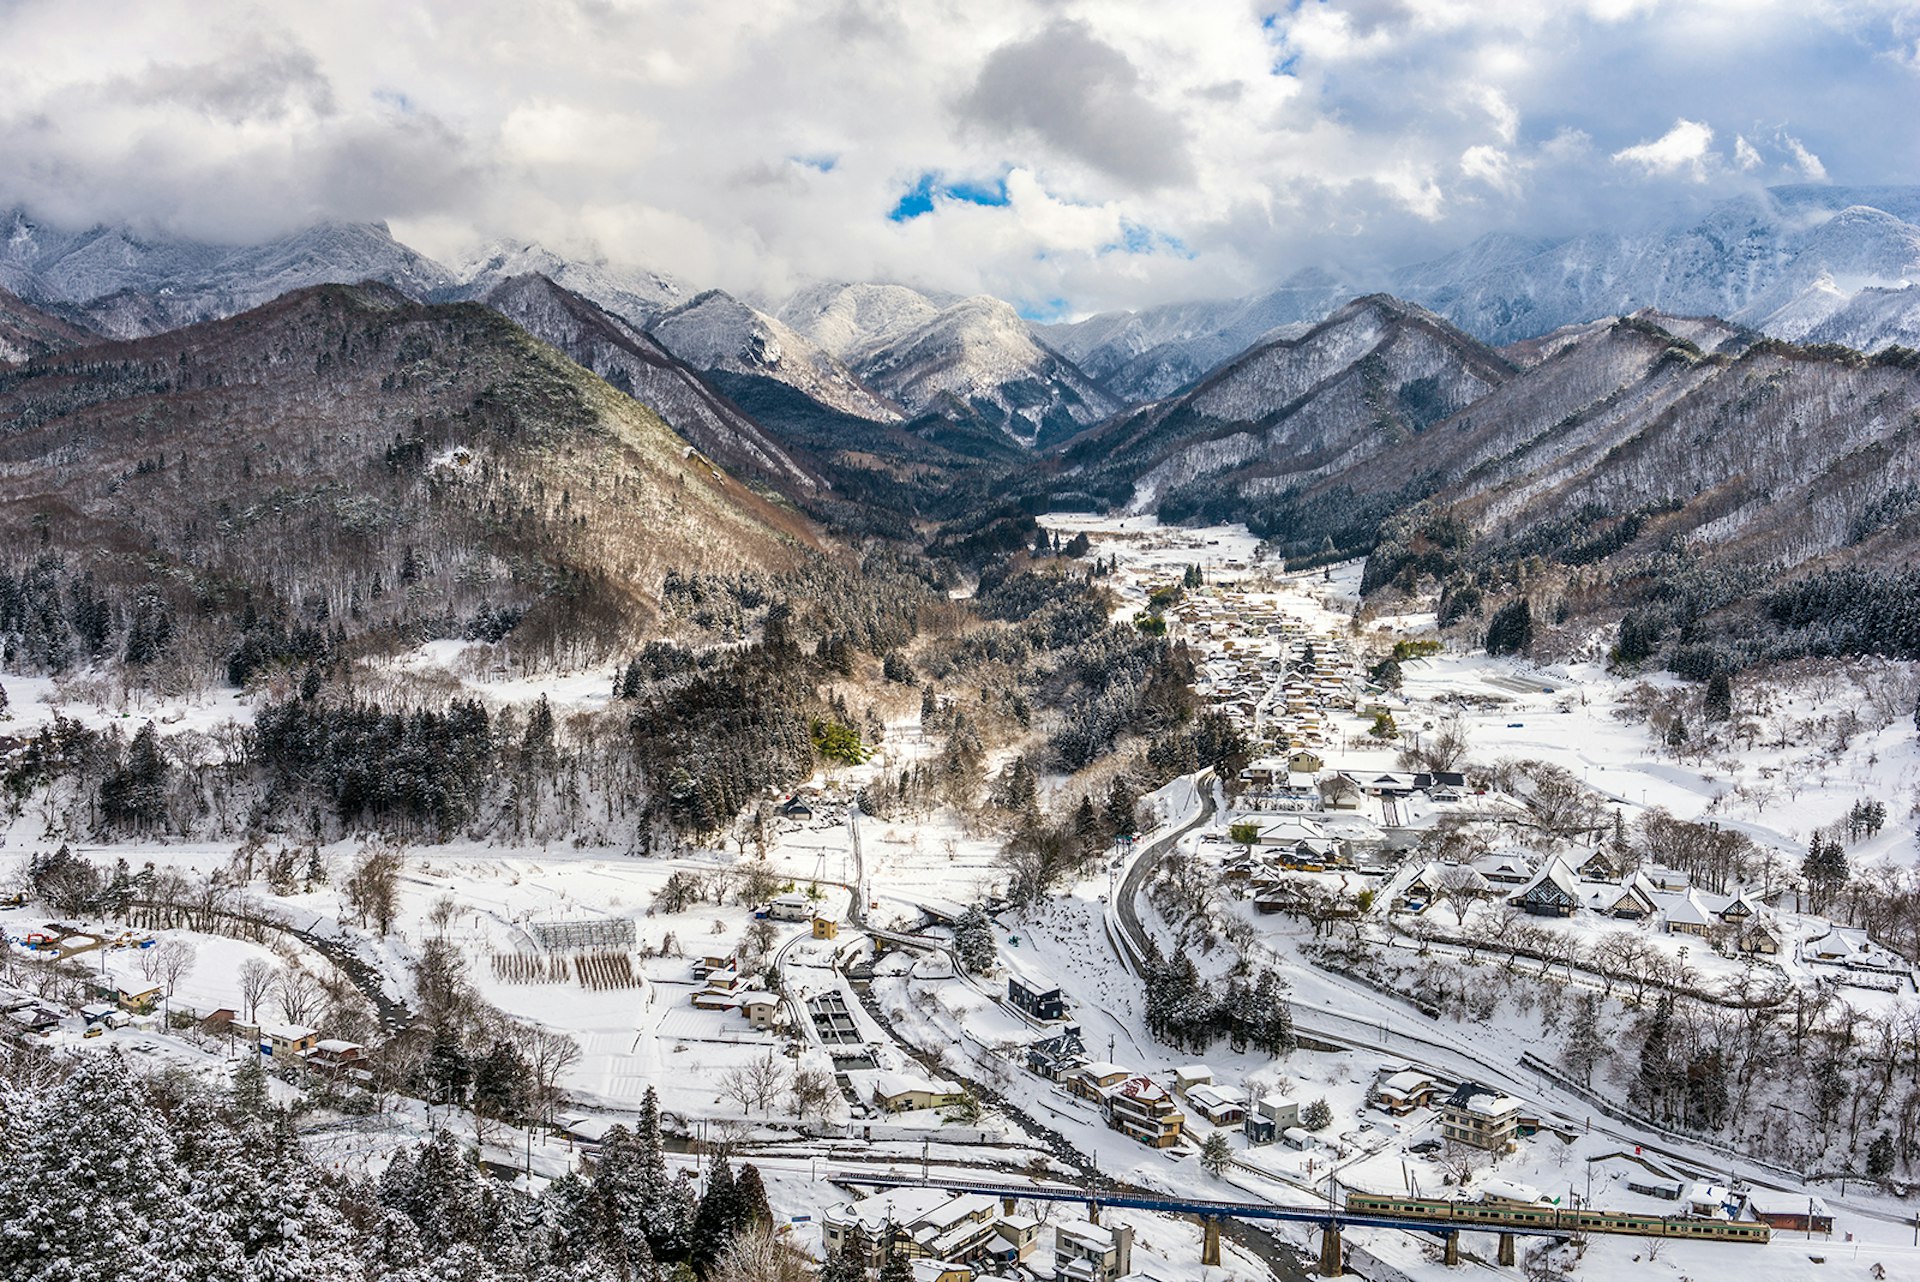 An aerial view of a snow-covered valley with a small village. A mountain range stretches off into the distance.